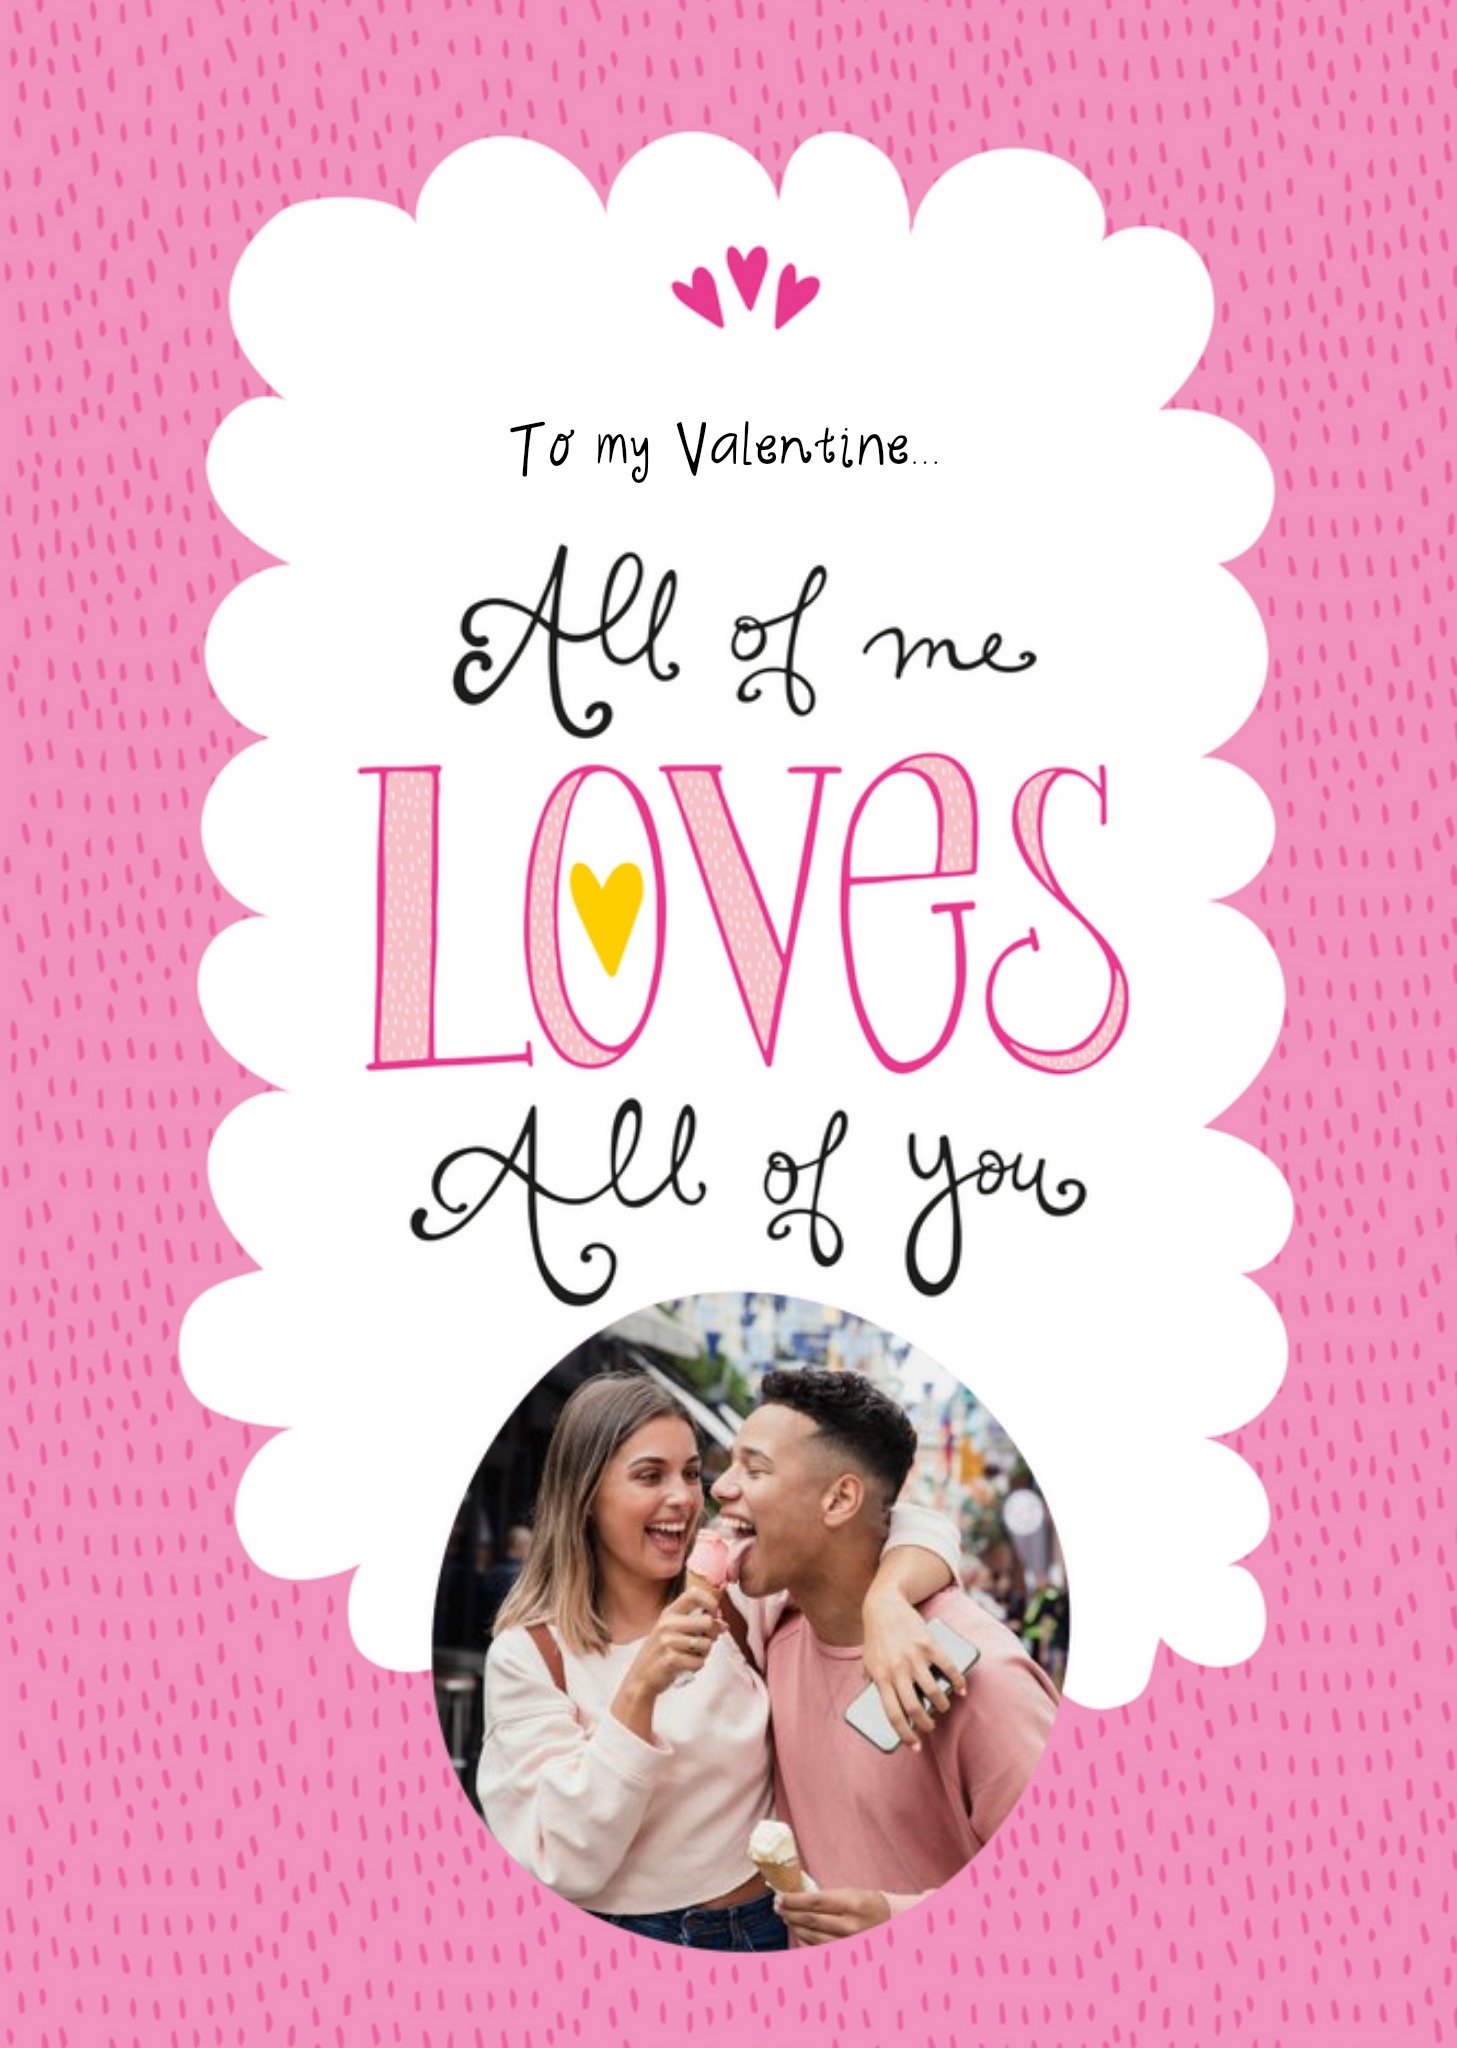 Moonpig Frilly White Lozenge On A Speckly Pink Background Valentine's Day Photo Upload Card Ecard